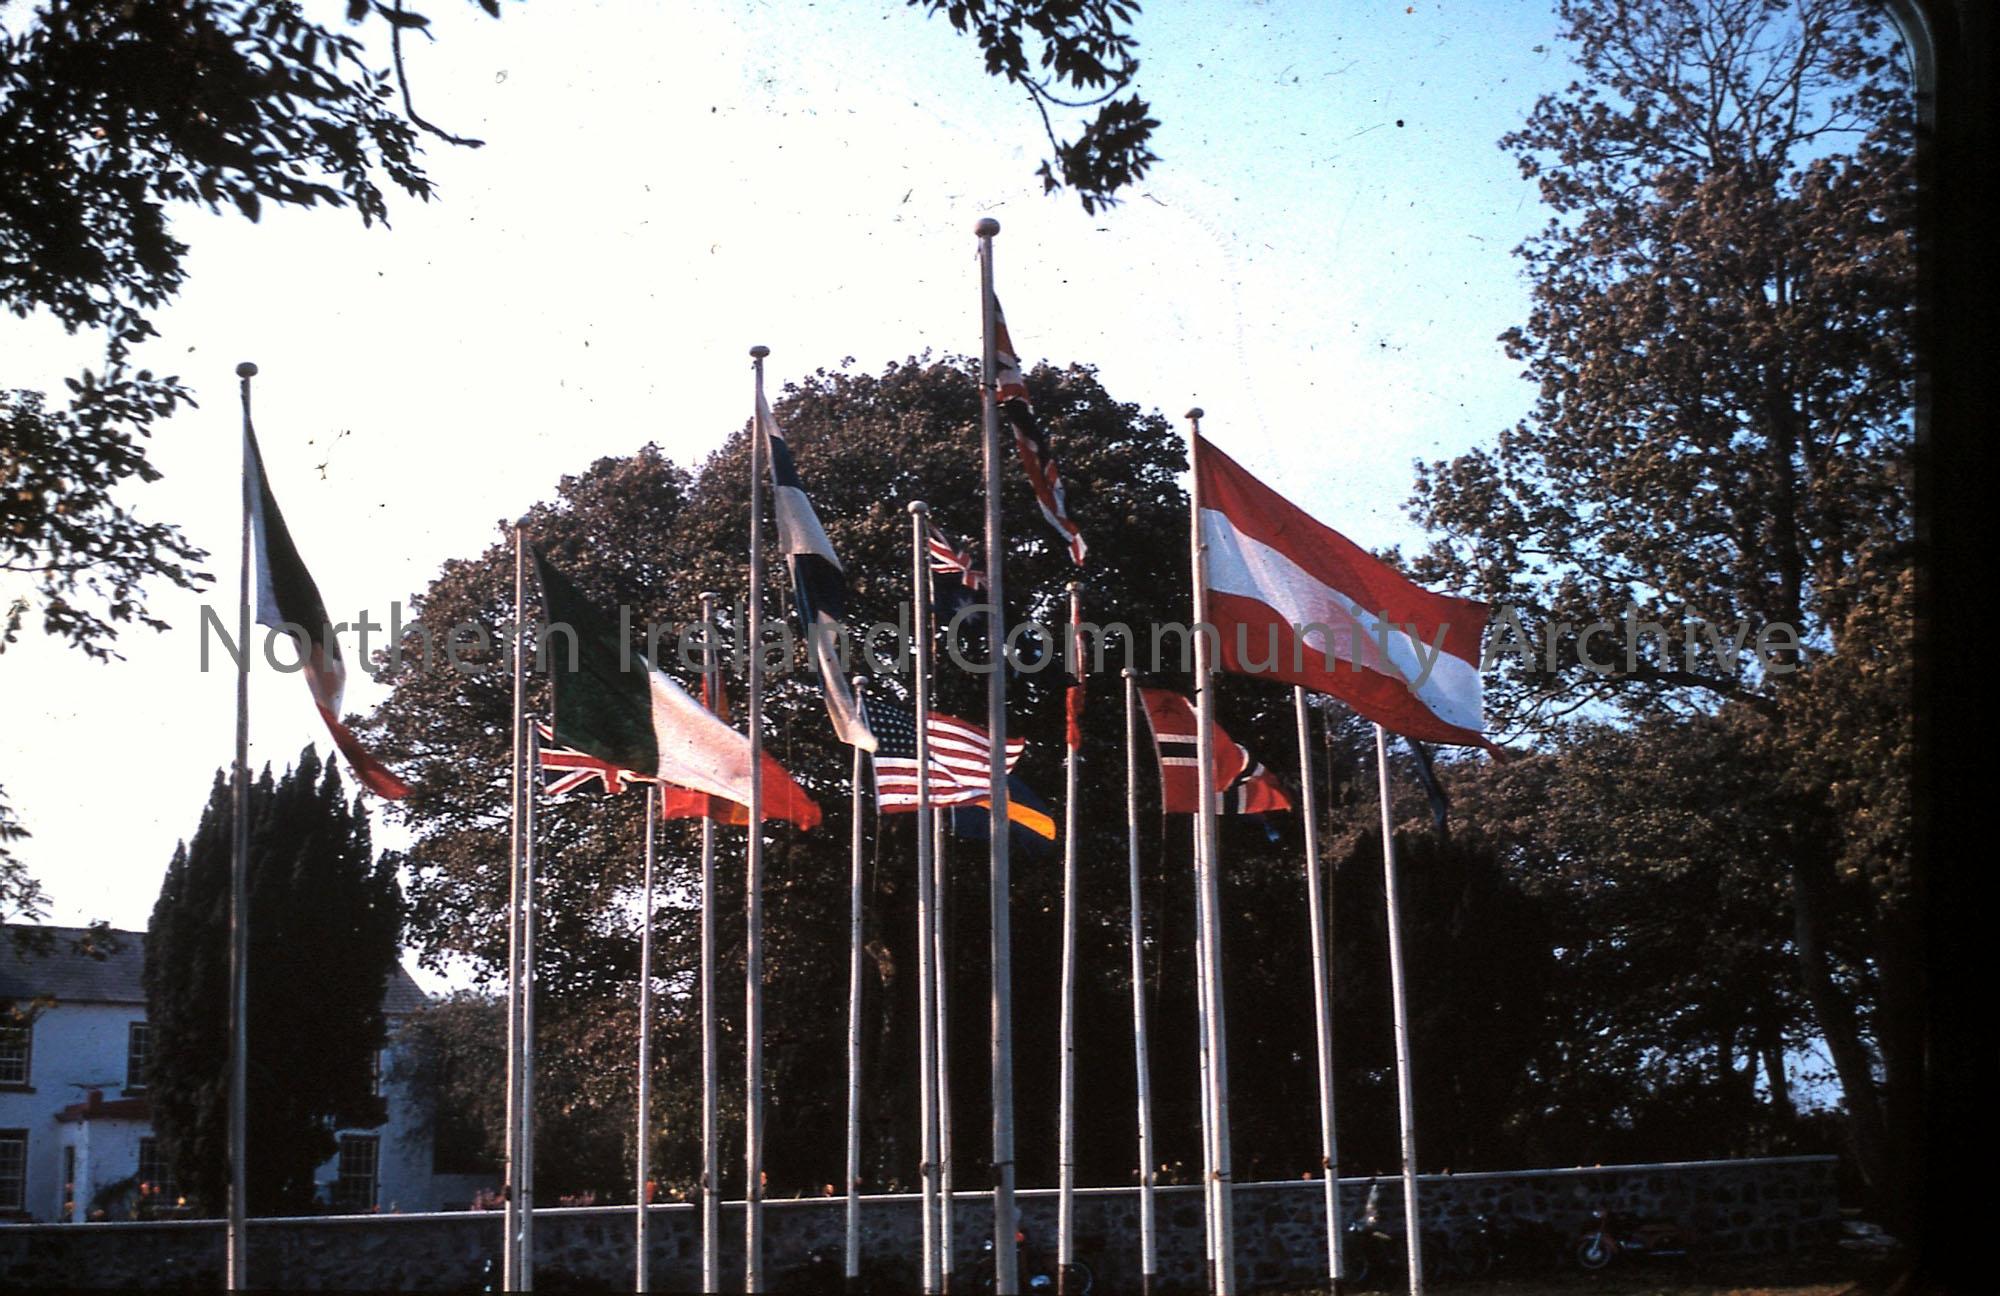 International ploughing match, 1959- Flags of the nations